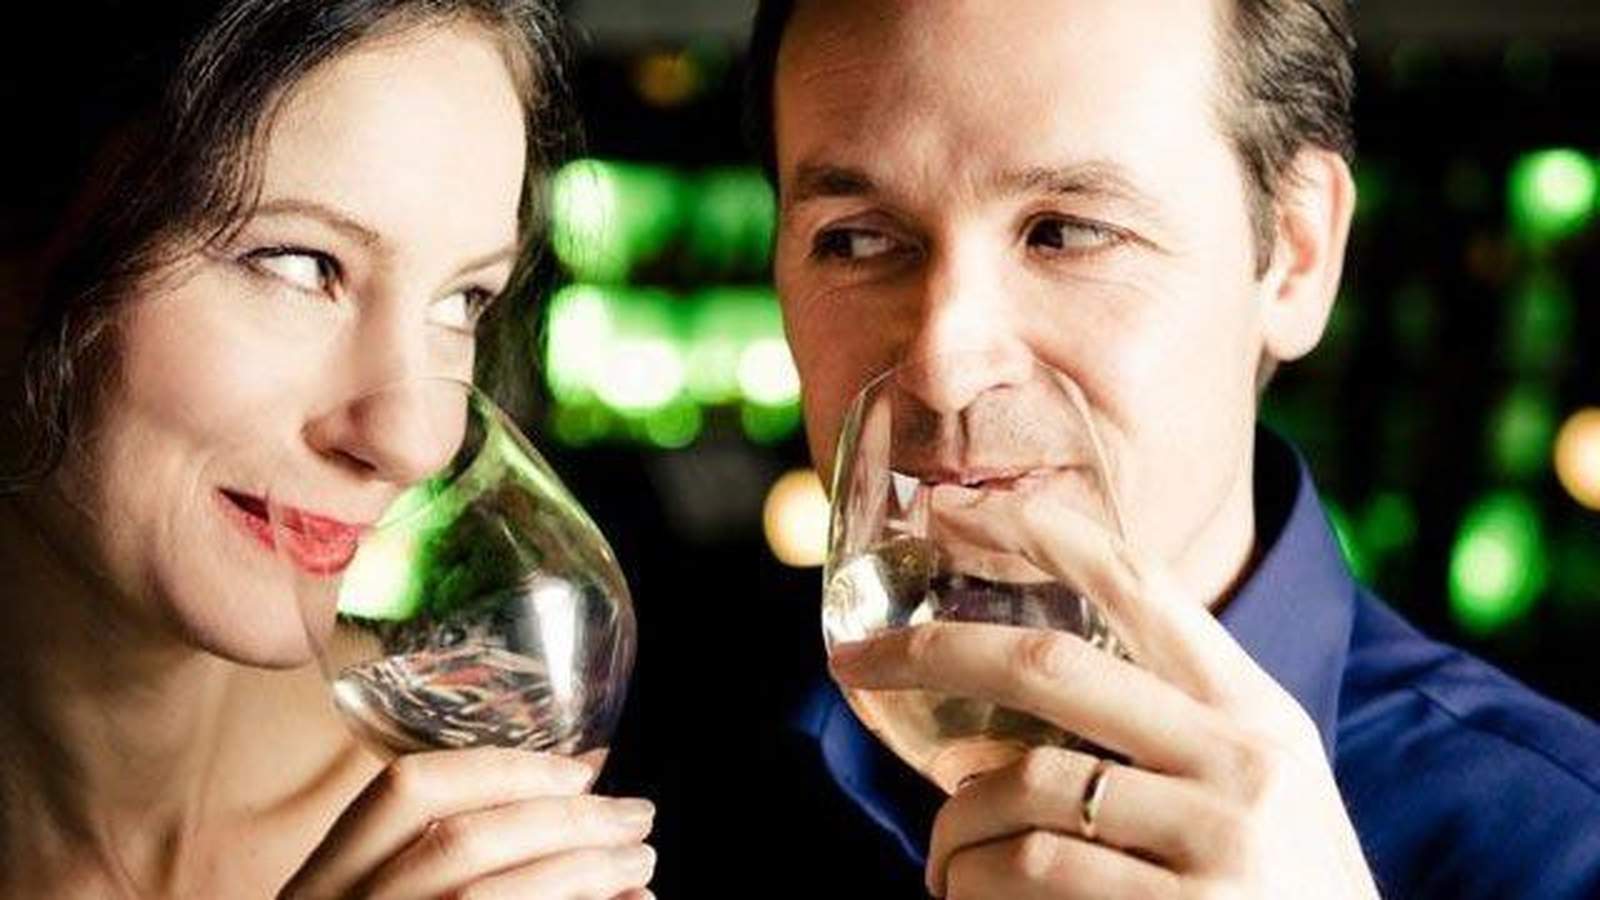 Here are the best Groupons for date night in Central Florida